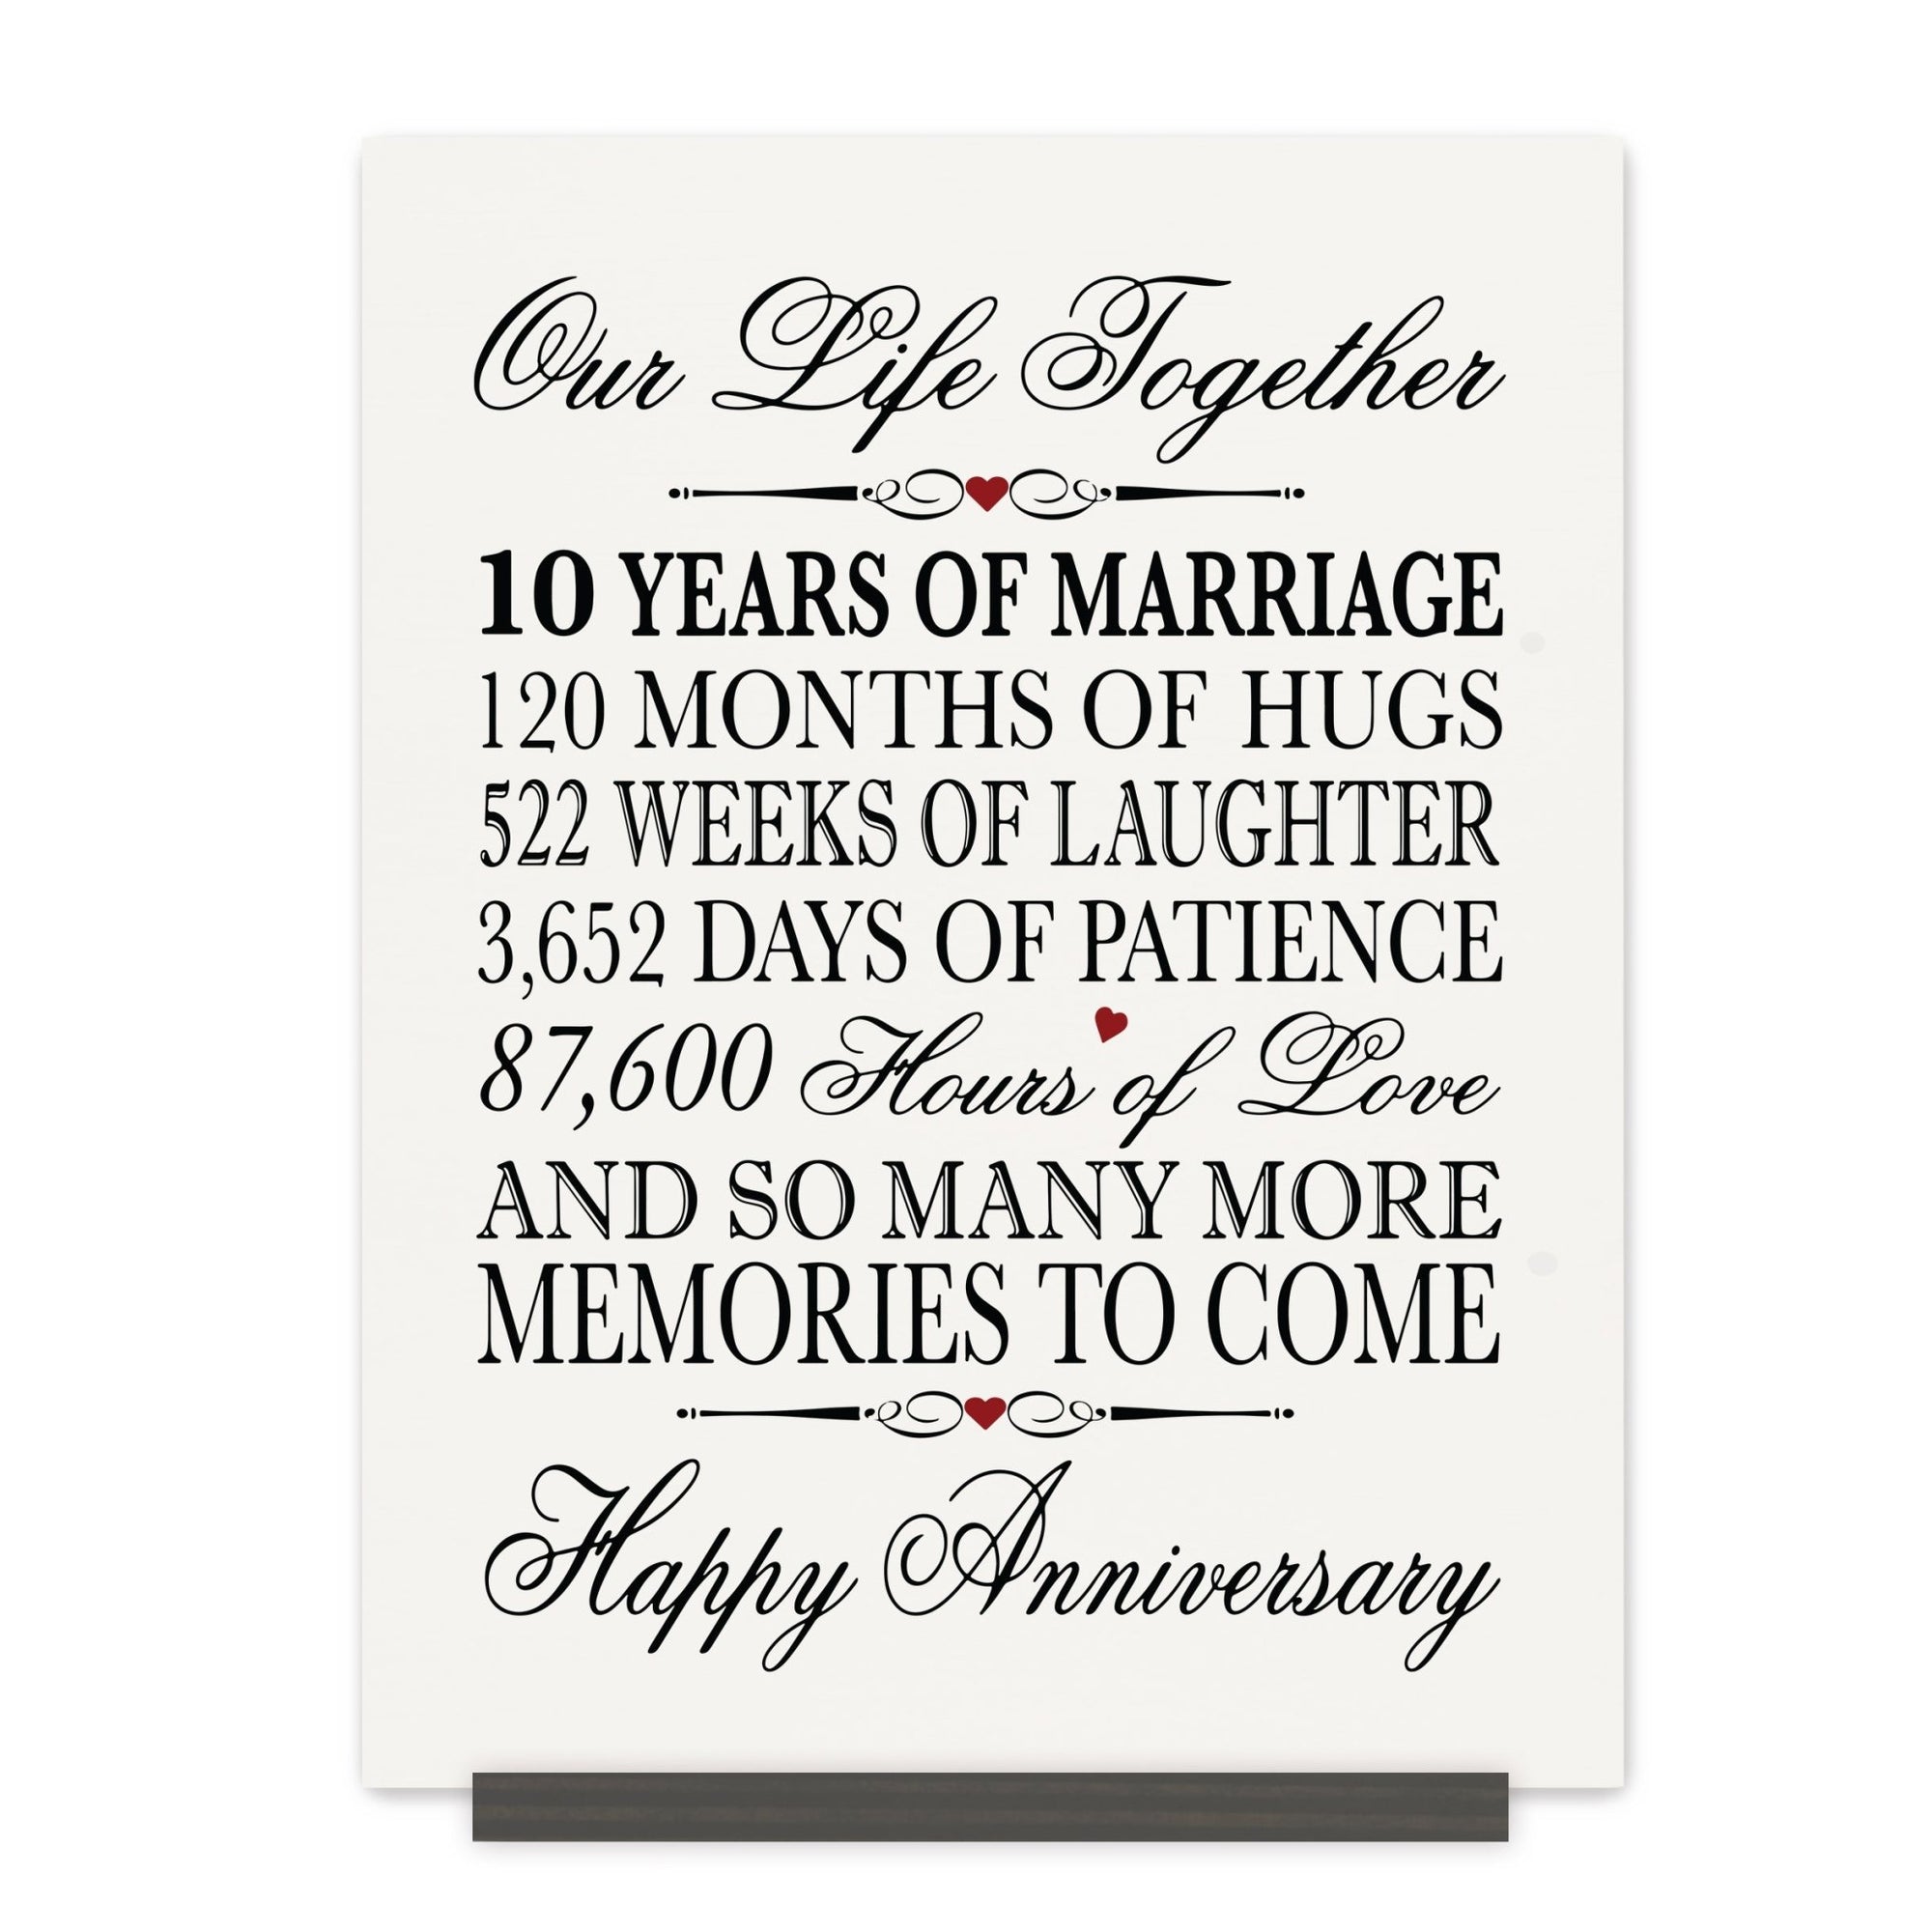 10th Wedding Anniversary Wall Plaque - Our Life Together - LifeSong Milestones